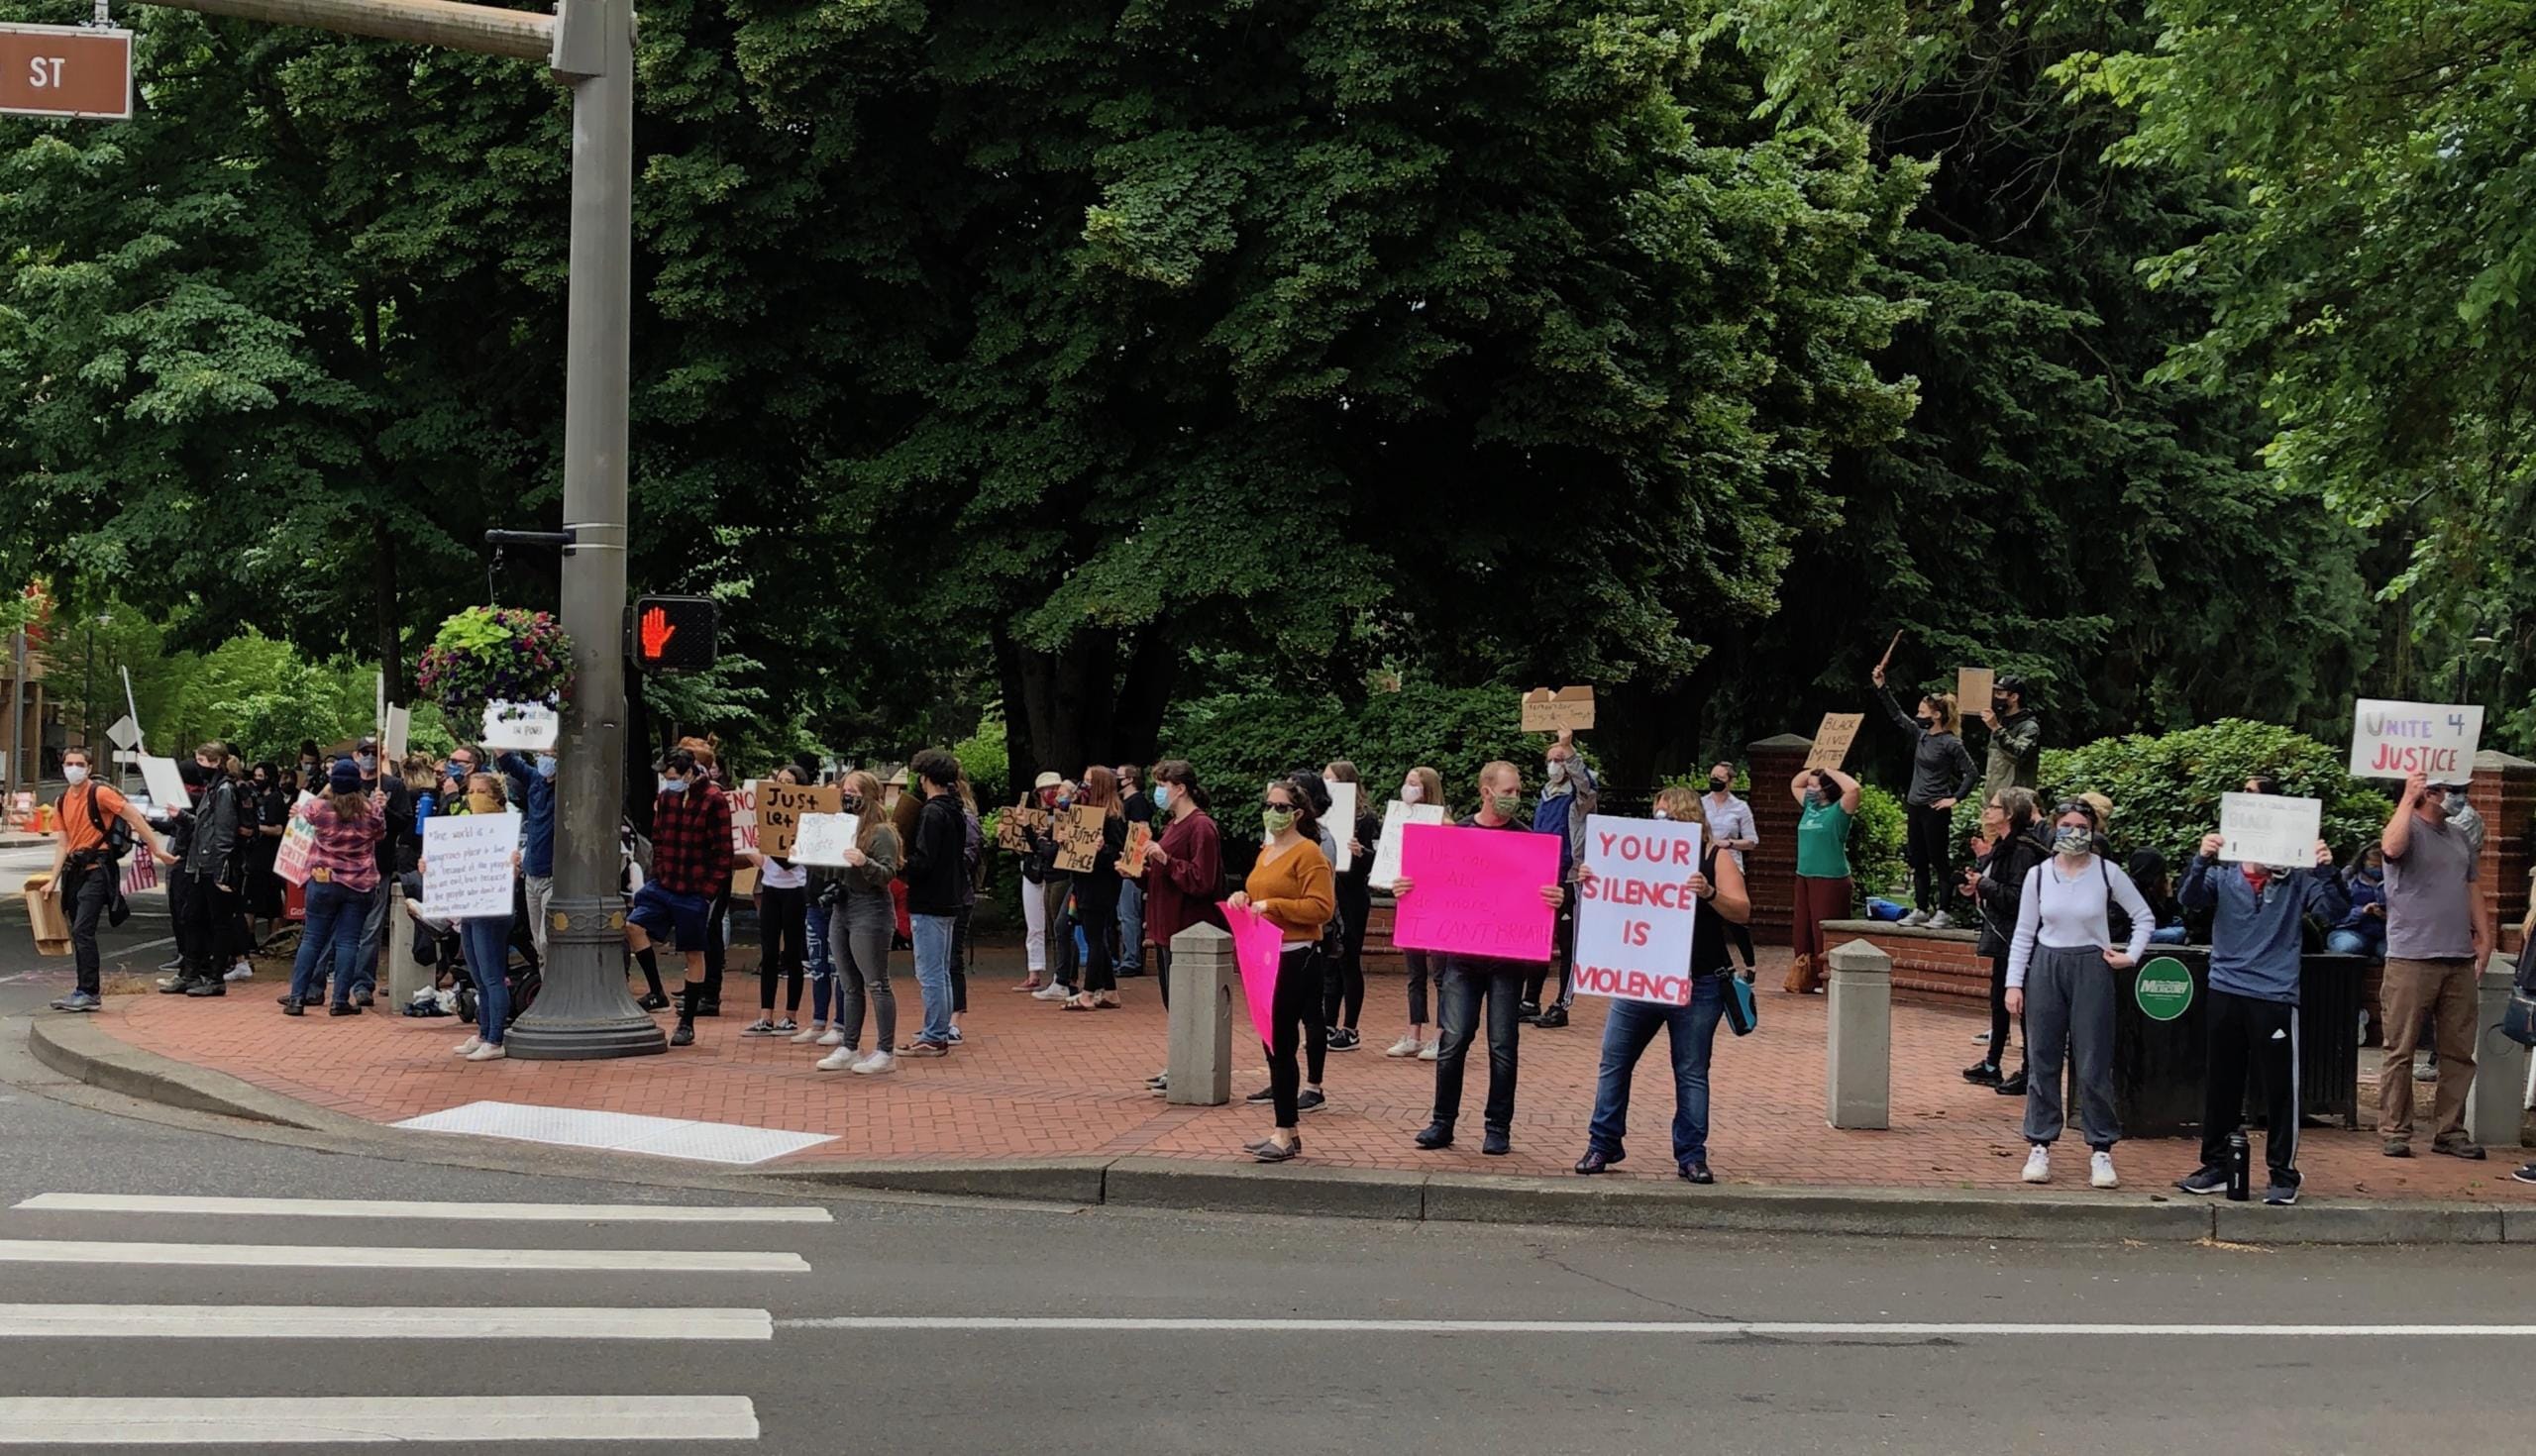 Demonstrators gathered at the corner of West 8th Street and Columbia on Sunday. It was part of protests in cities nationwide following the death of George Floyd in Minneapolis on May 25.